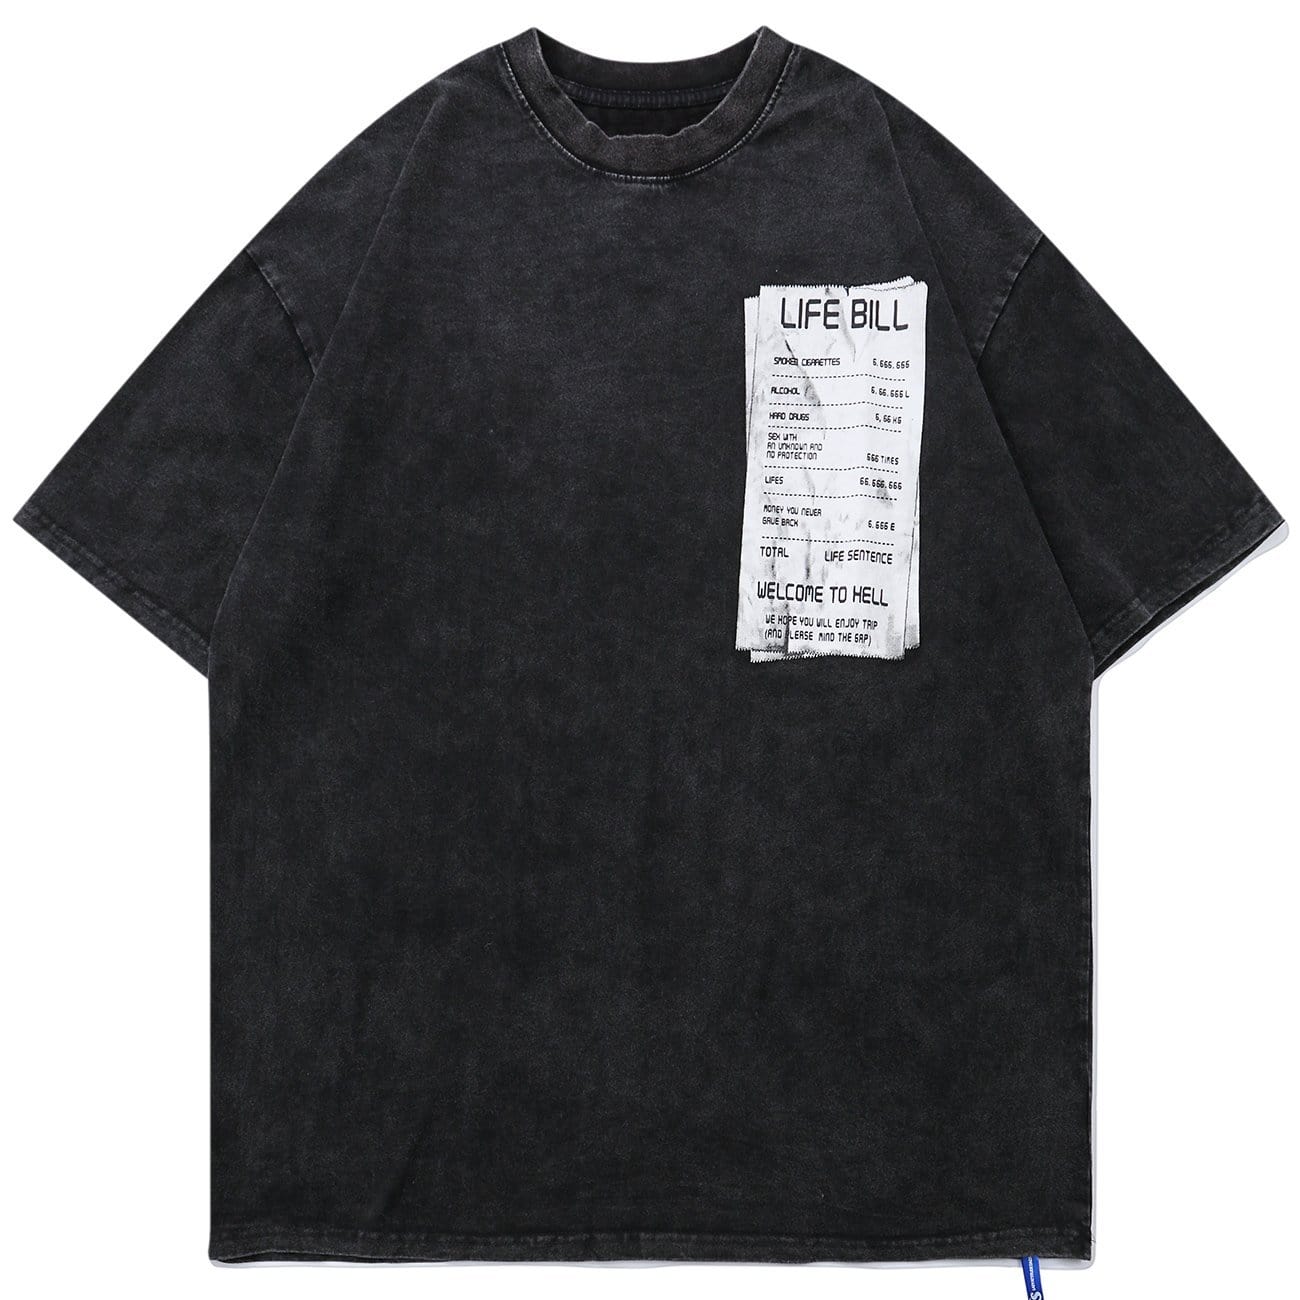 Distressed Painting Washed Tee Streetwear Brand Techwear Combat Tactical YUGEN THEORY